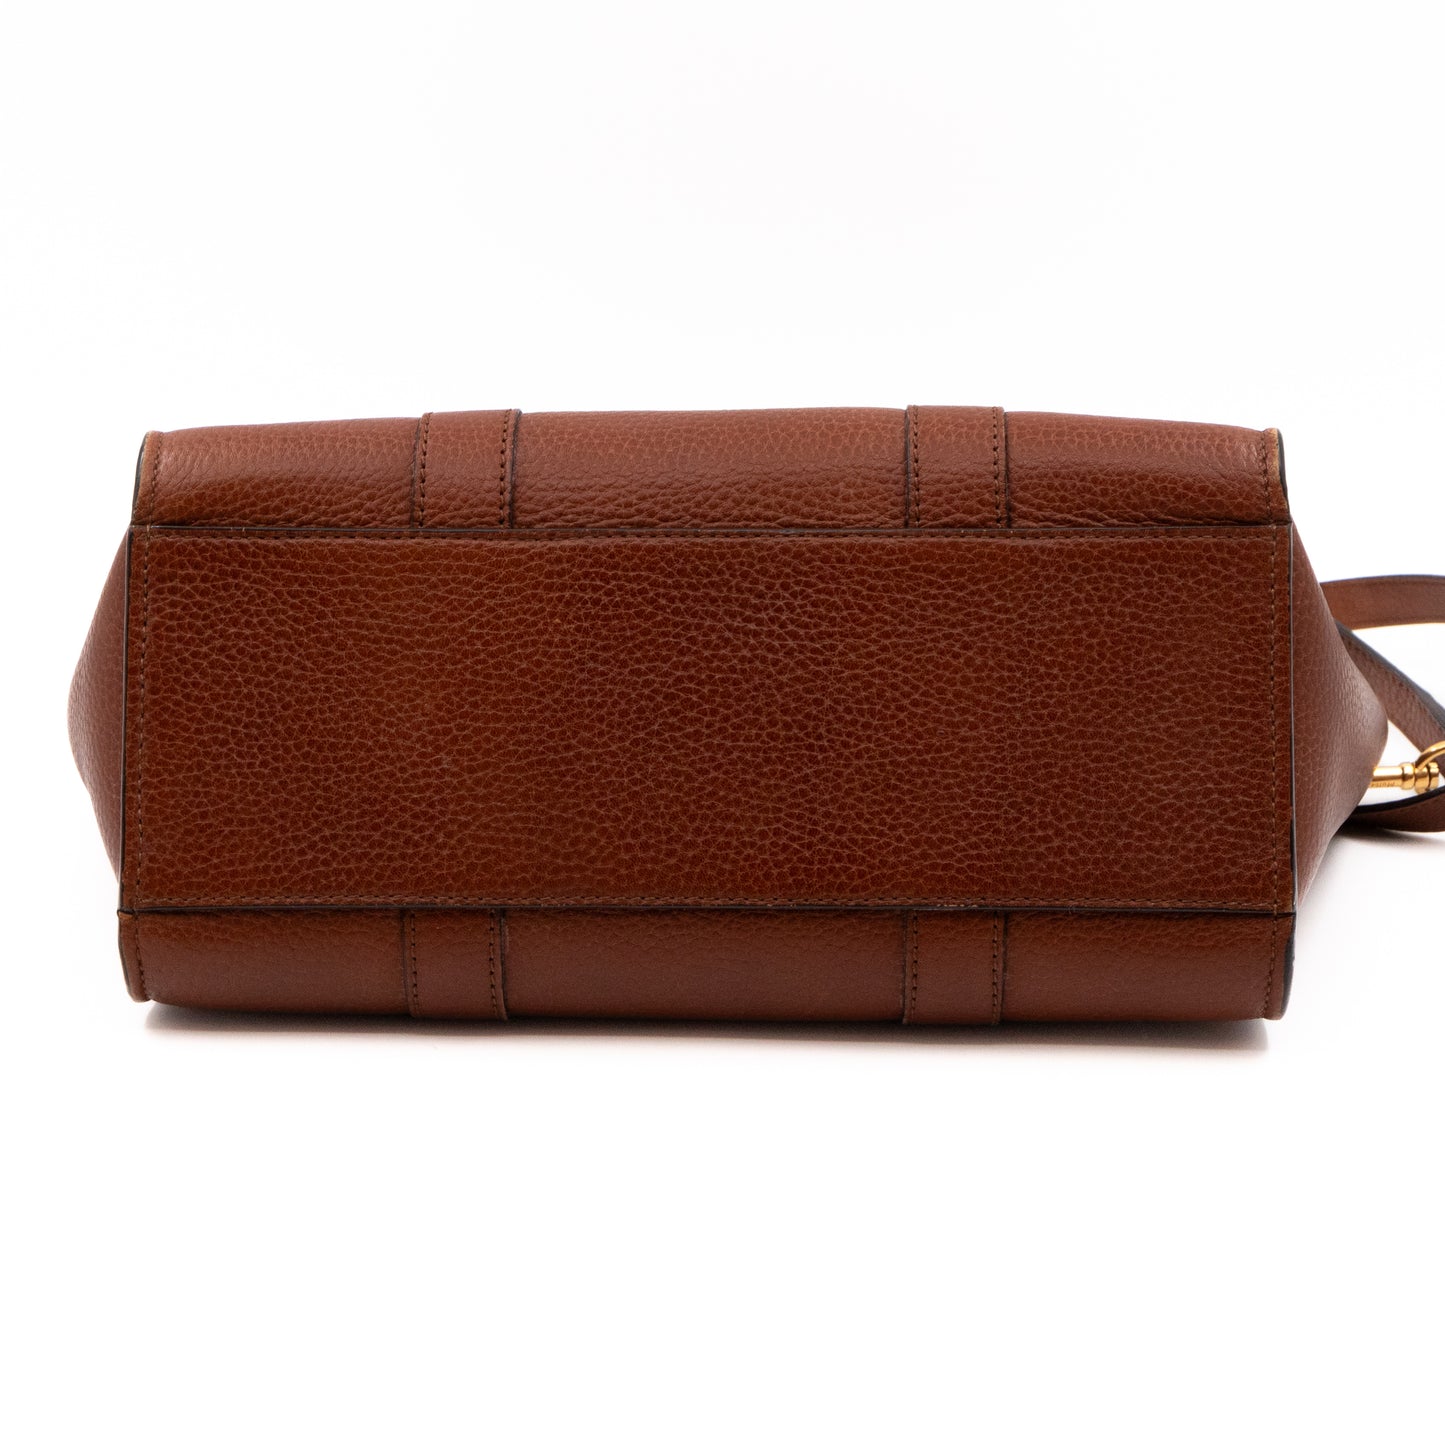 Small New Bayswater Oak Brown Leather